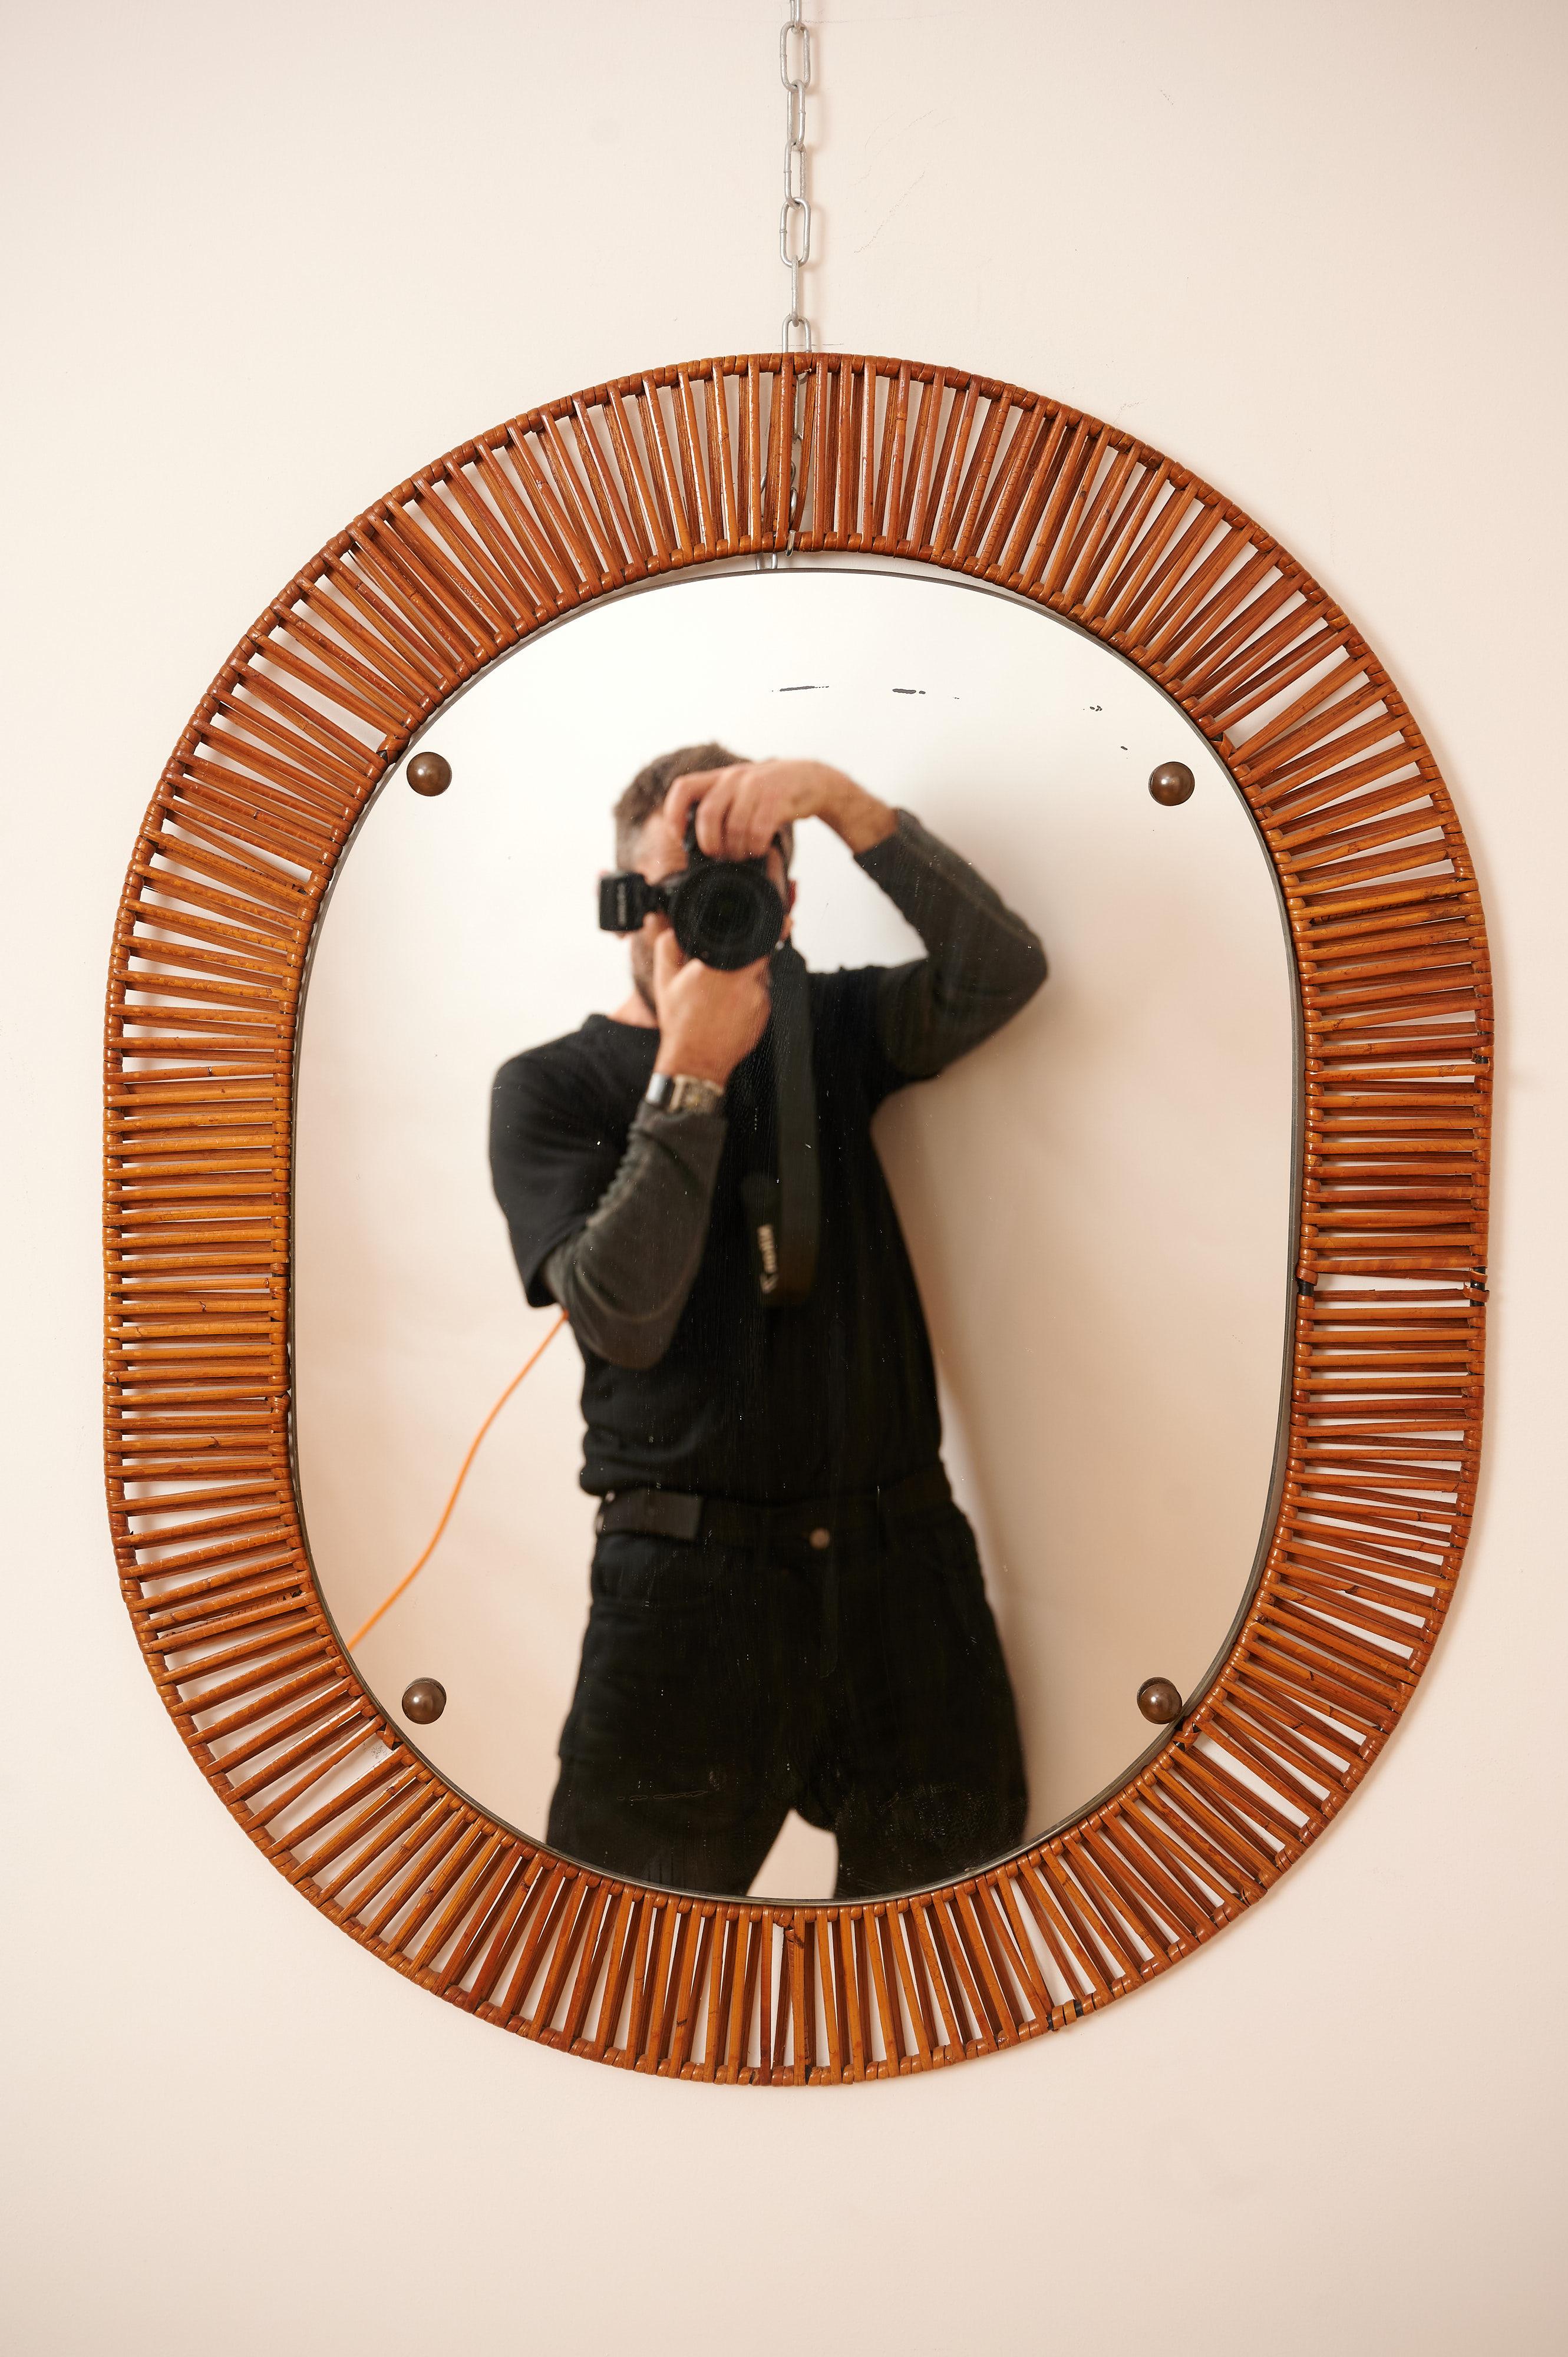 A wall mirror, produced in Italy c1950. 
Cut mirror glass is framed with rattan. With brass details.

Nice light patina to mirror.

Designers at this time were Gio Ponti, Max Ingrand, Charlotte Perriand, Joseph Frank and Franco Albini. Bonacina